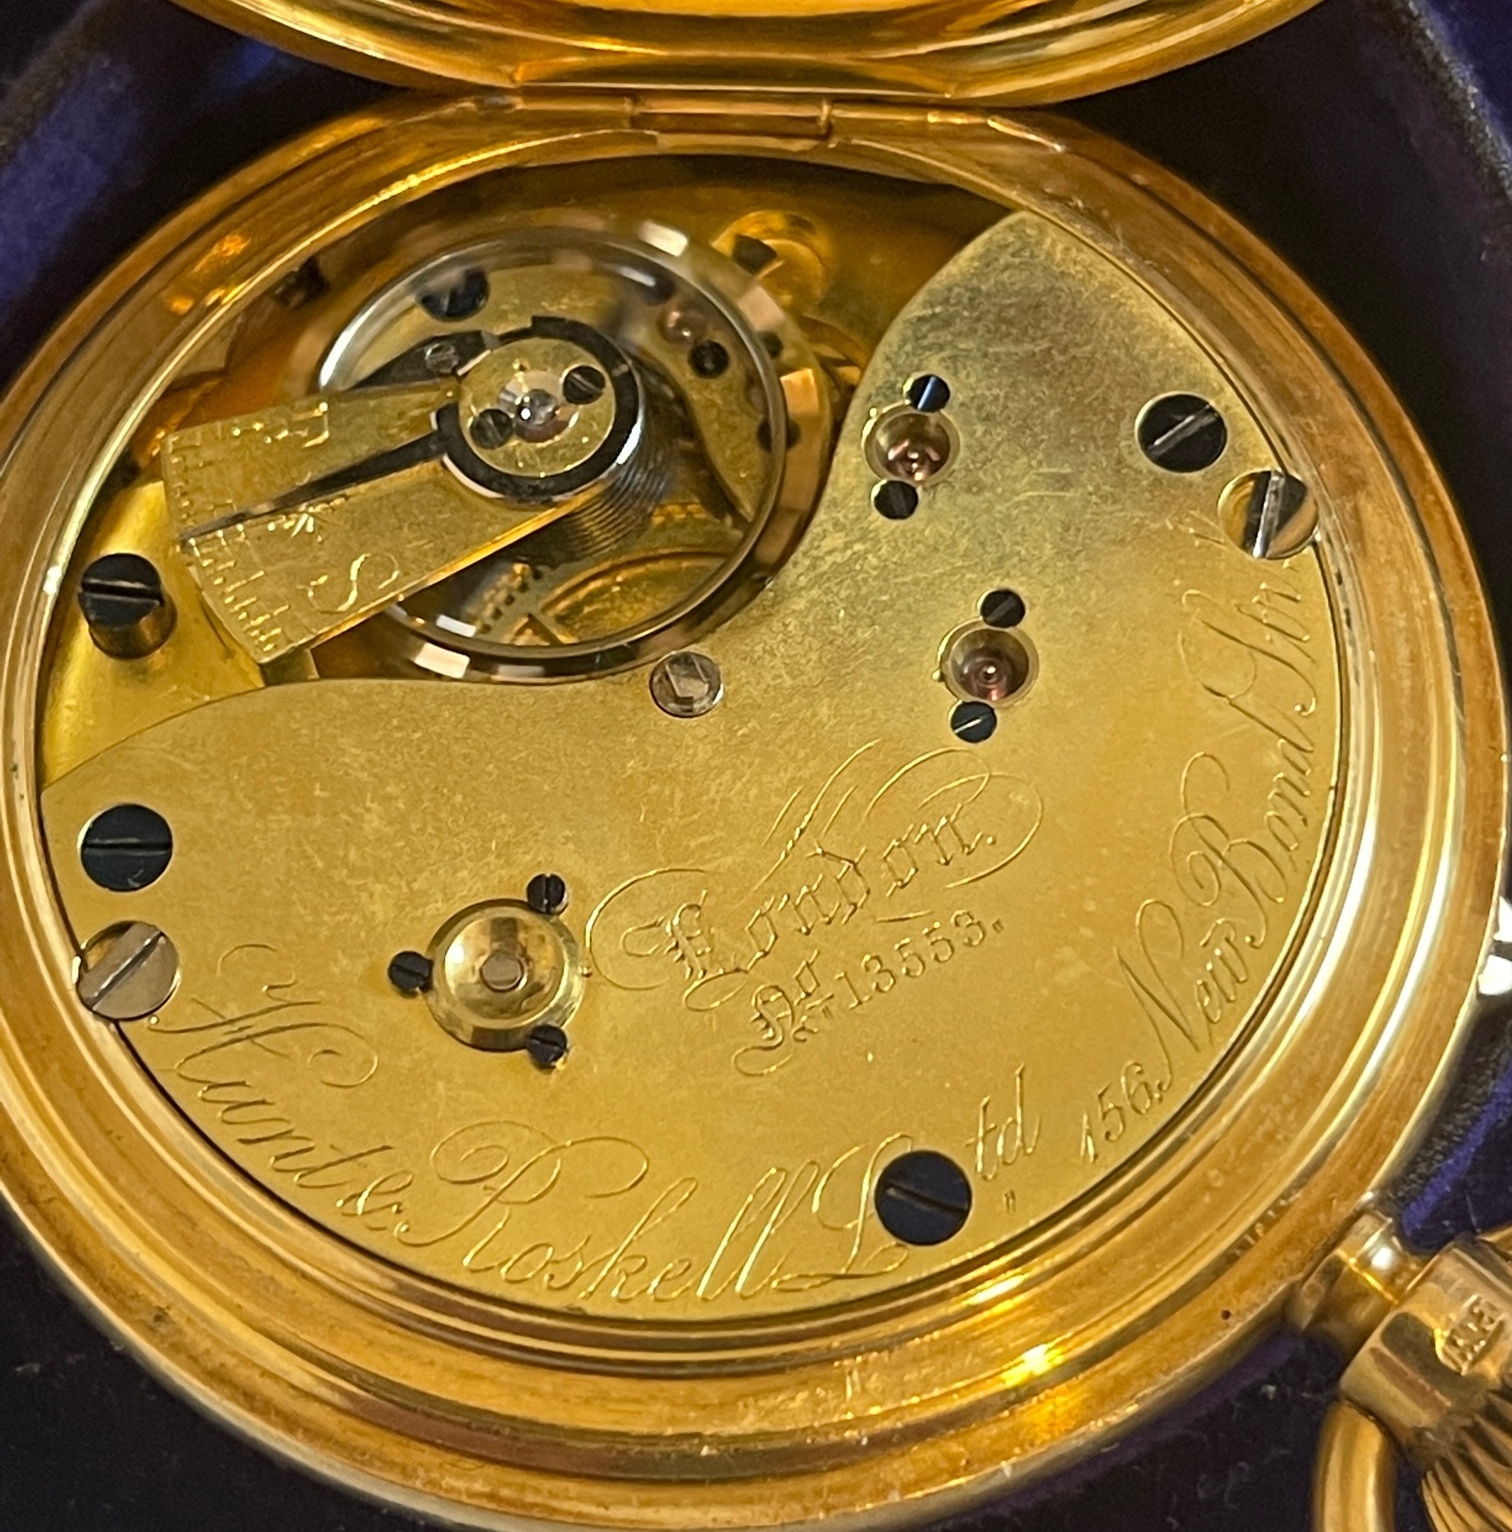 Antique Hunt&Roskell 18ct Gold Full Hunter Pocket Watch-working with Cameron Highlanders Inscription - Image 9 of 9